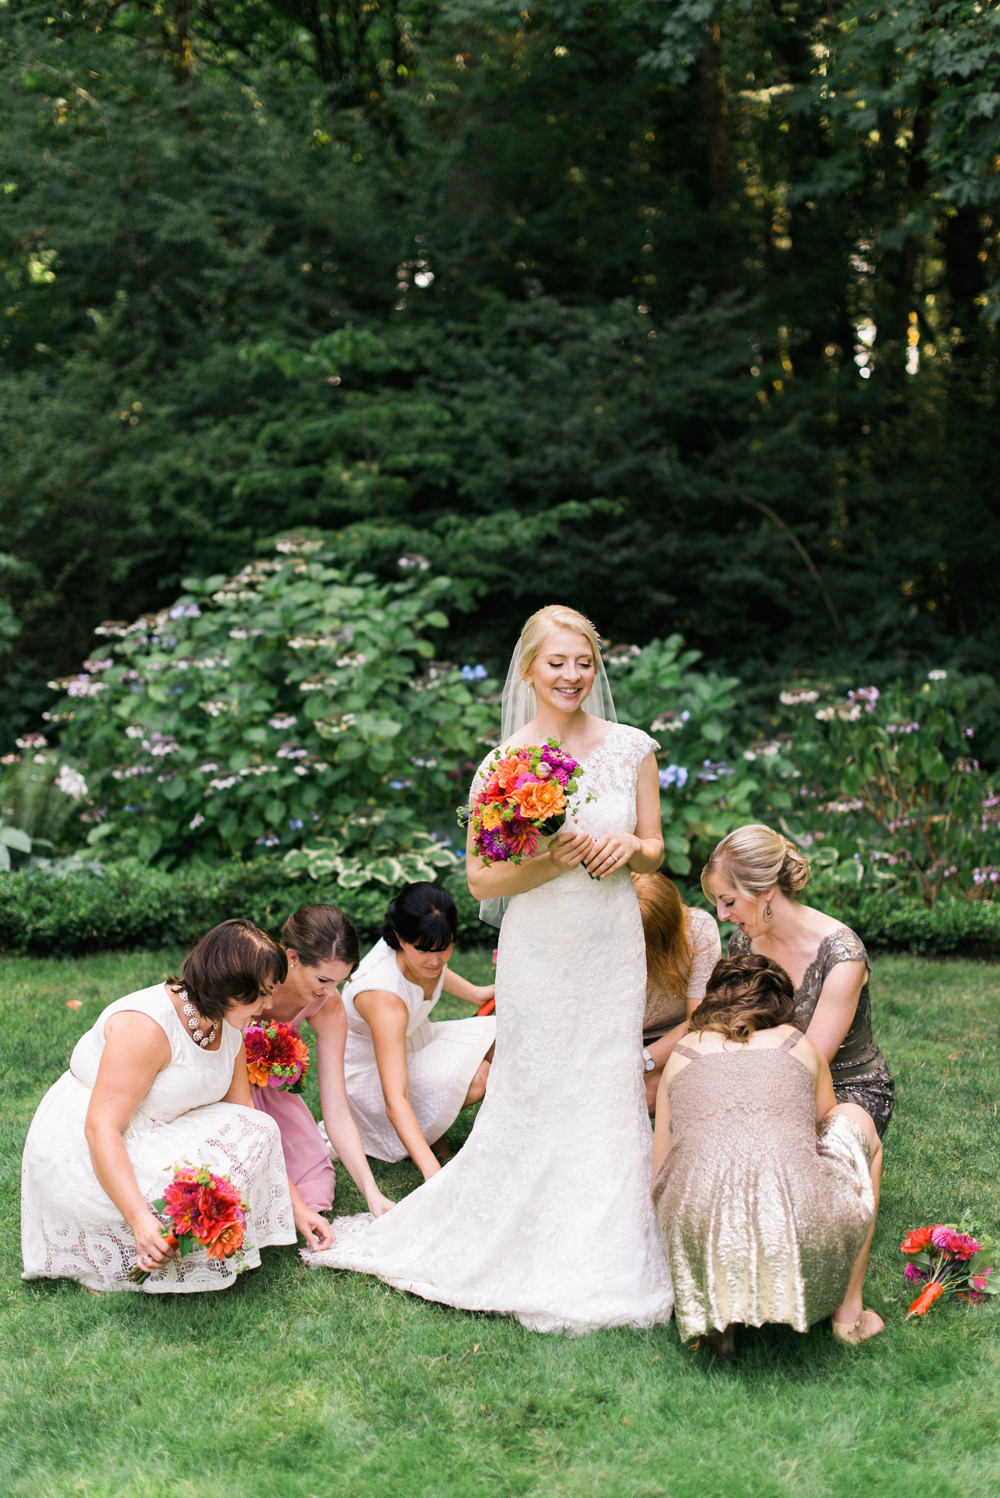 Bridalbliss.com | Portland Wedding | Oregon Event Planning and Design | You Look Good Today Photography 